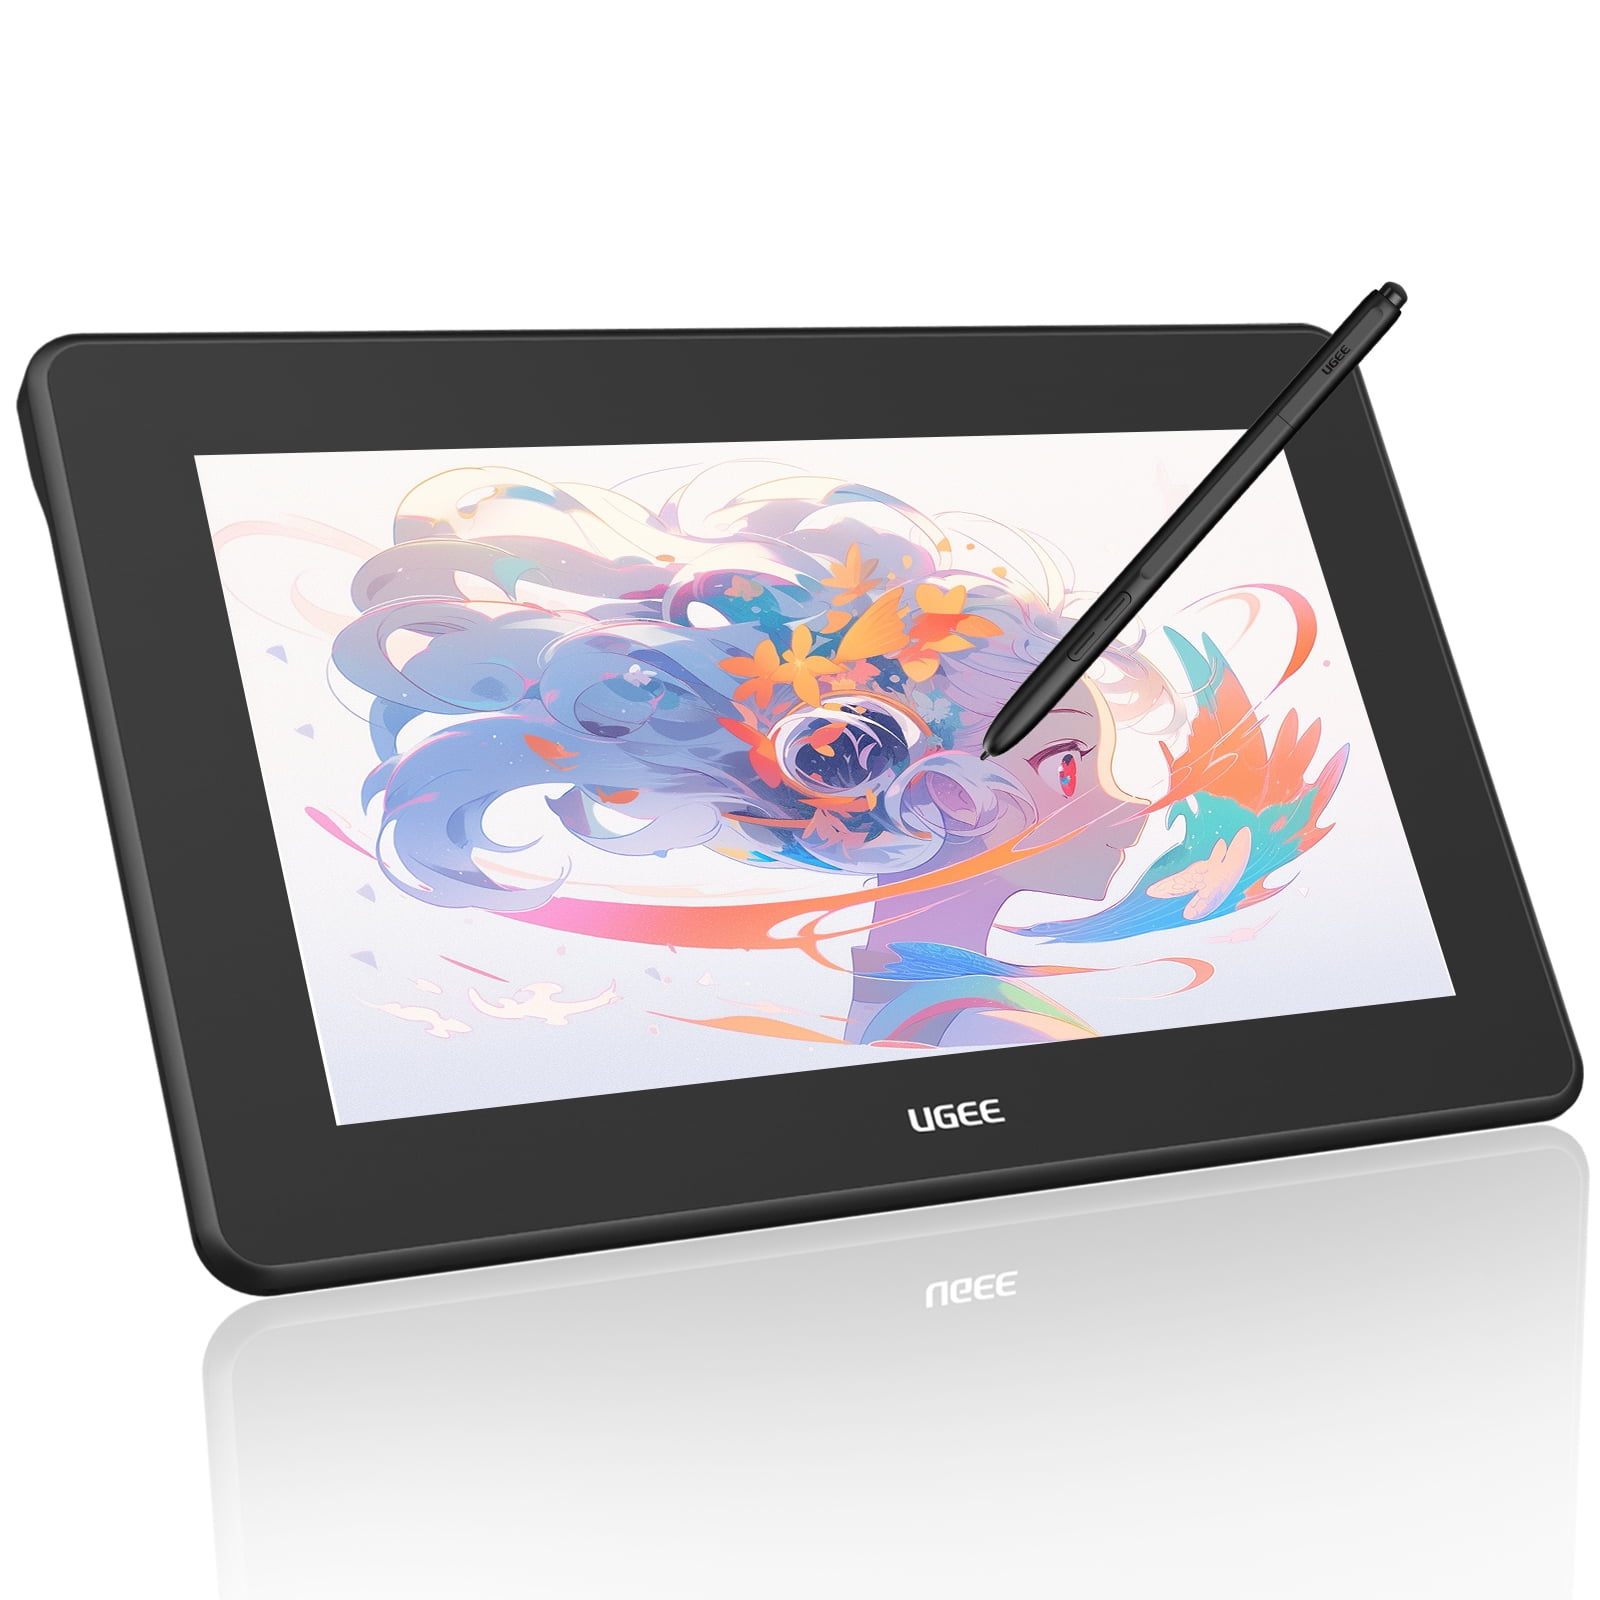 UGEE U1200 Drawing Tablet with Screen 11.9 inch Animation Art Tablets for  Linux, Mac, Windows and Chromebook - Walmart.com